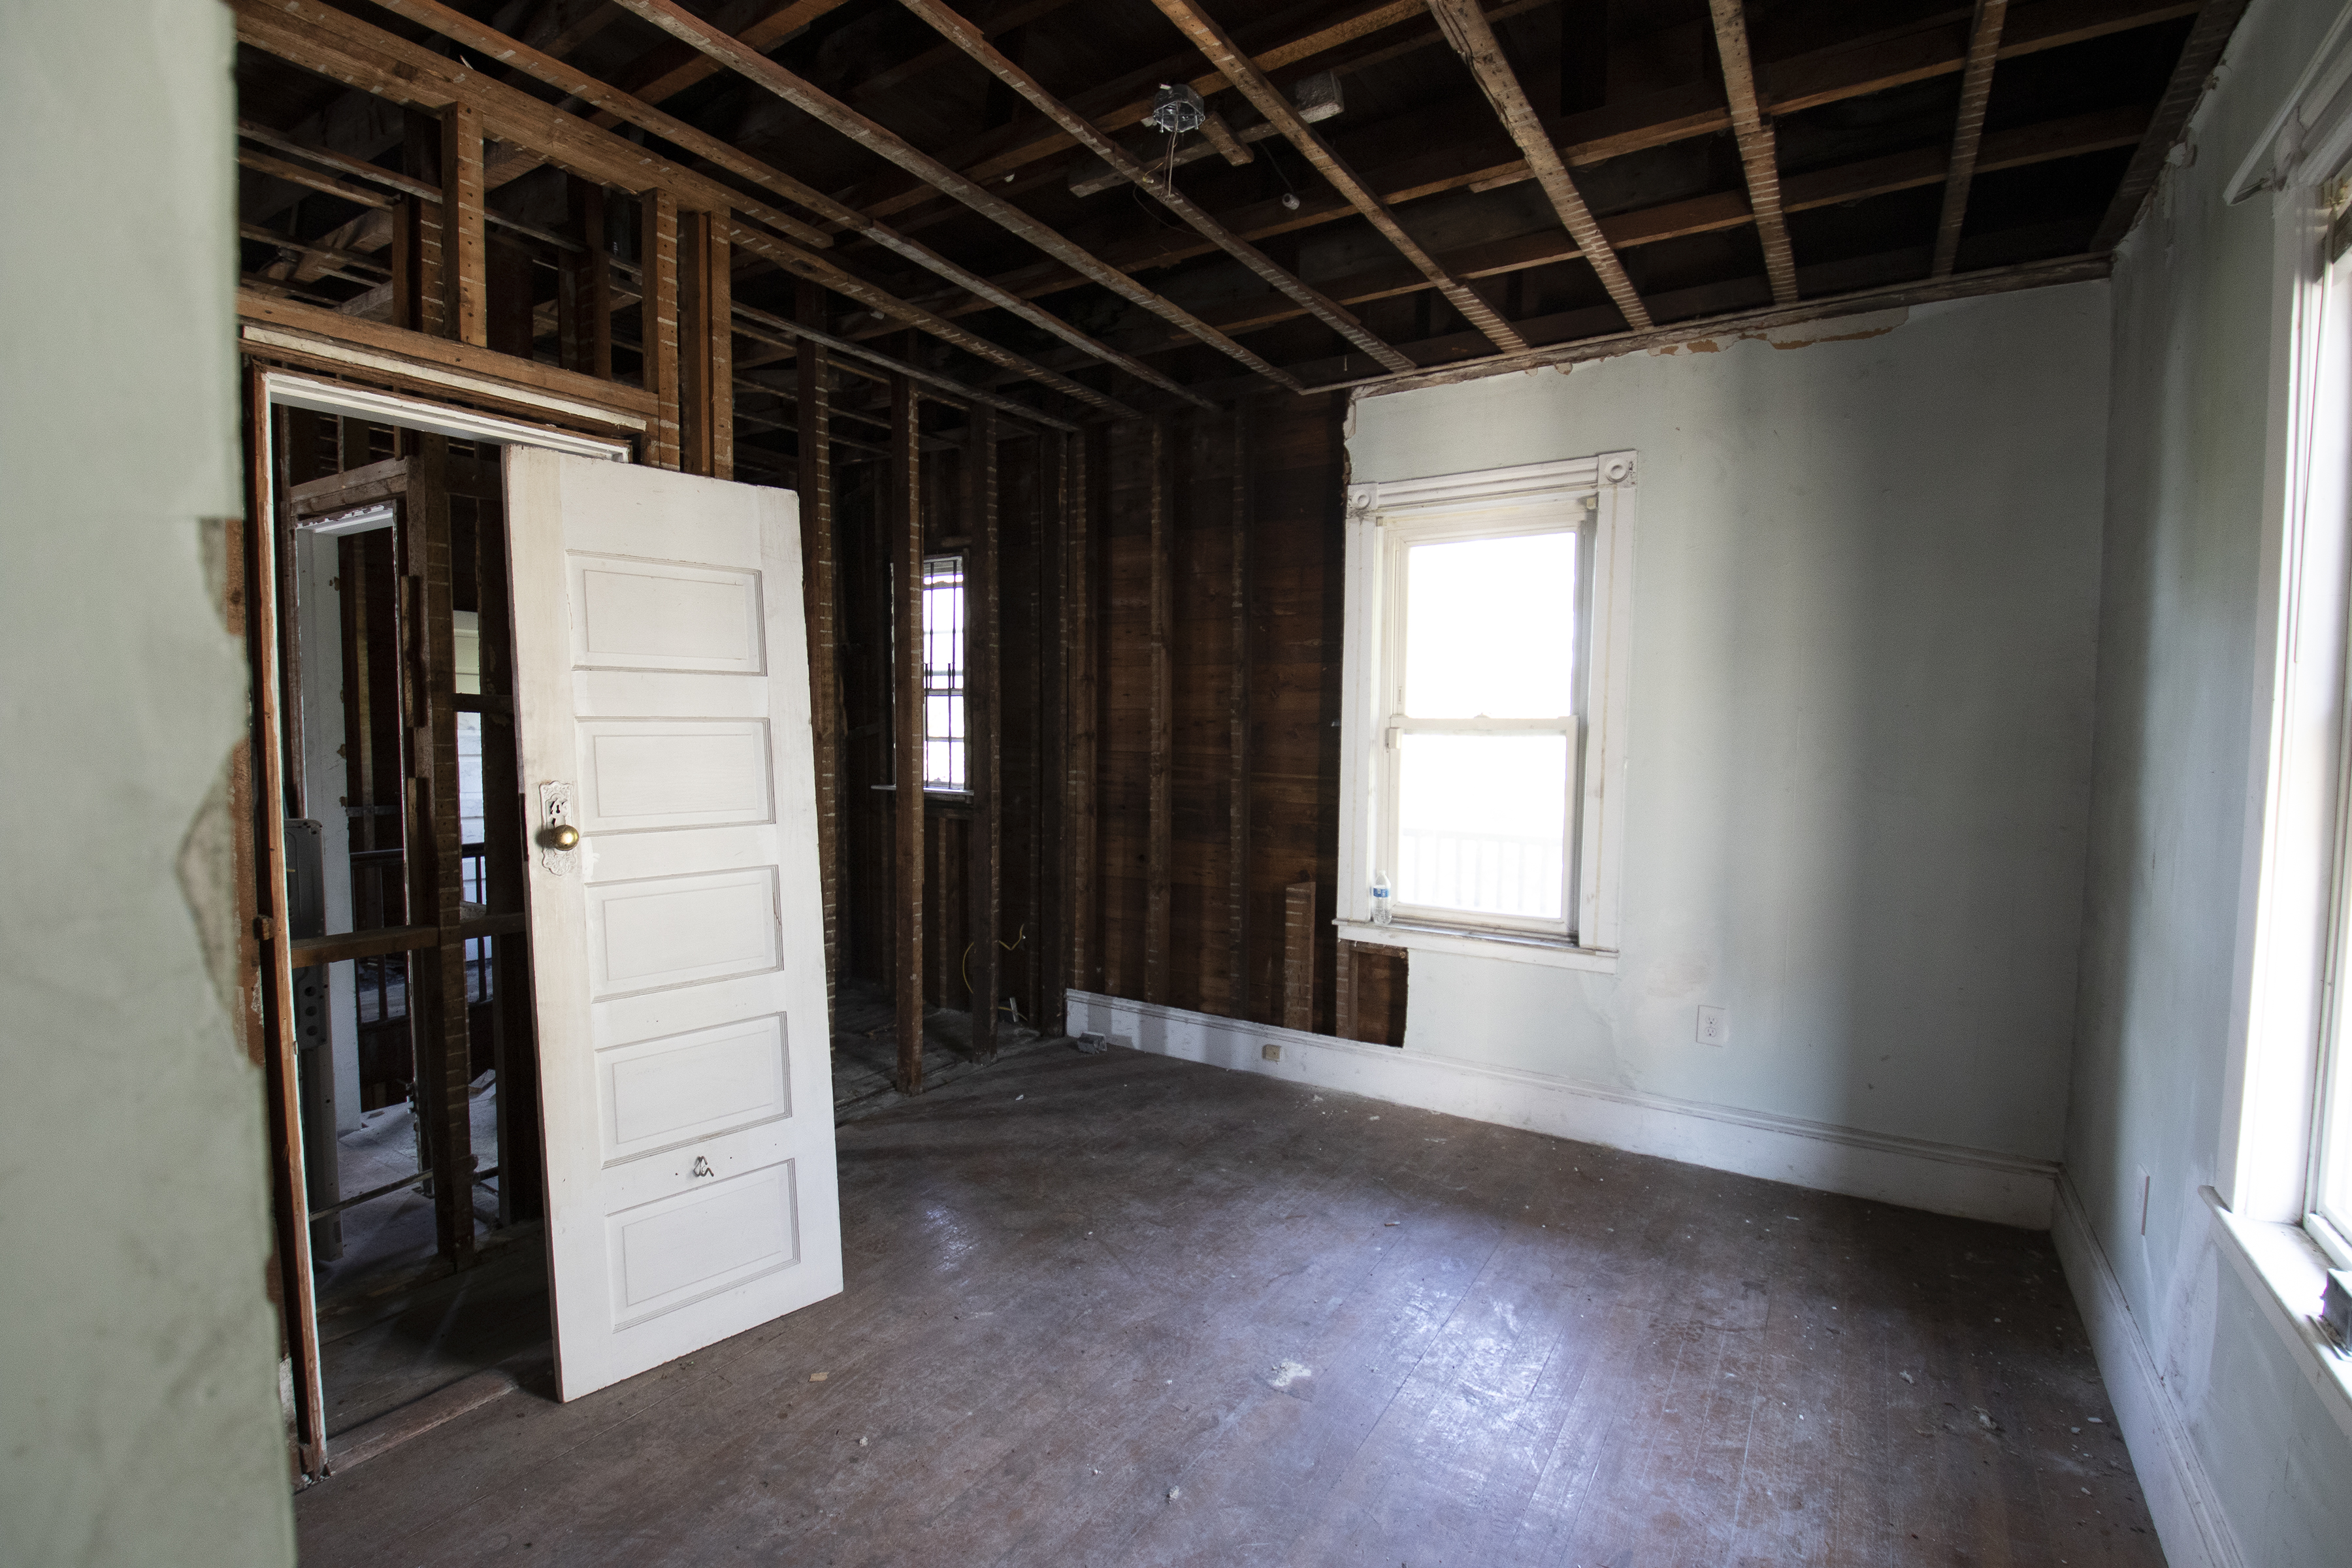 The interior of a house featured on This Old House  Season 42 that sustained fire damage. The left side of the room has all of the drywall removed and a door off of its hinges.